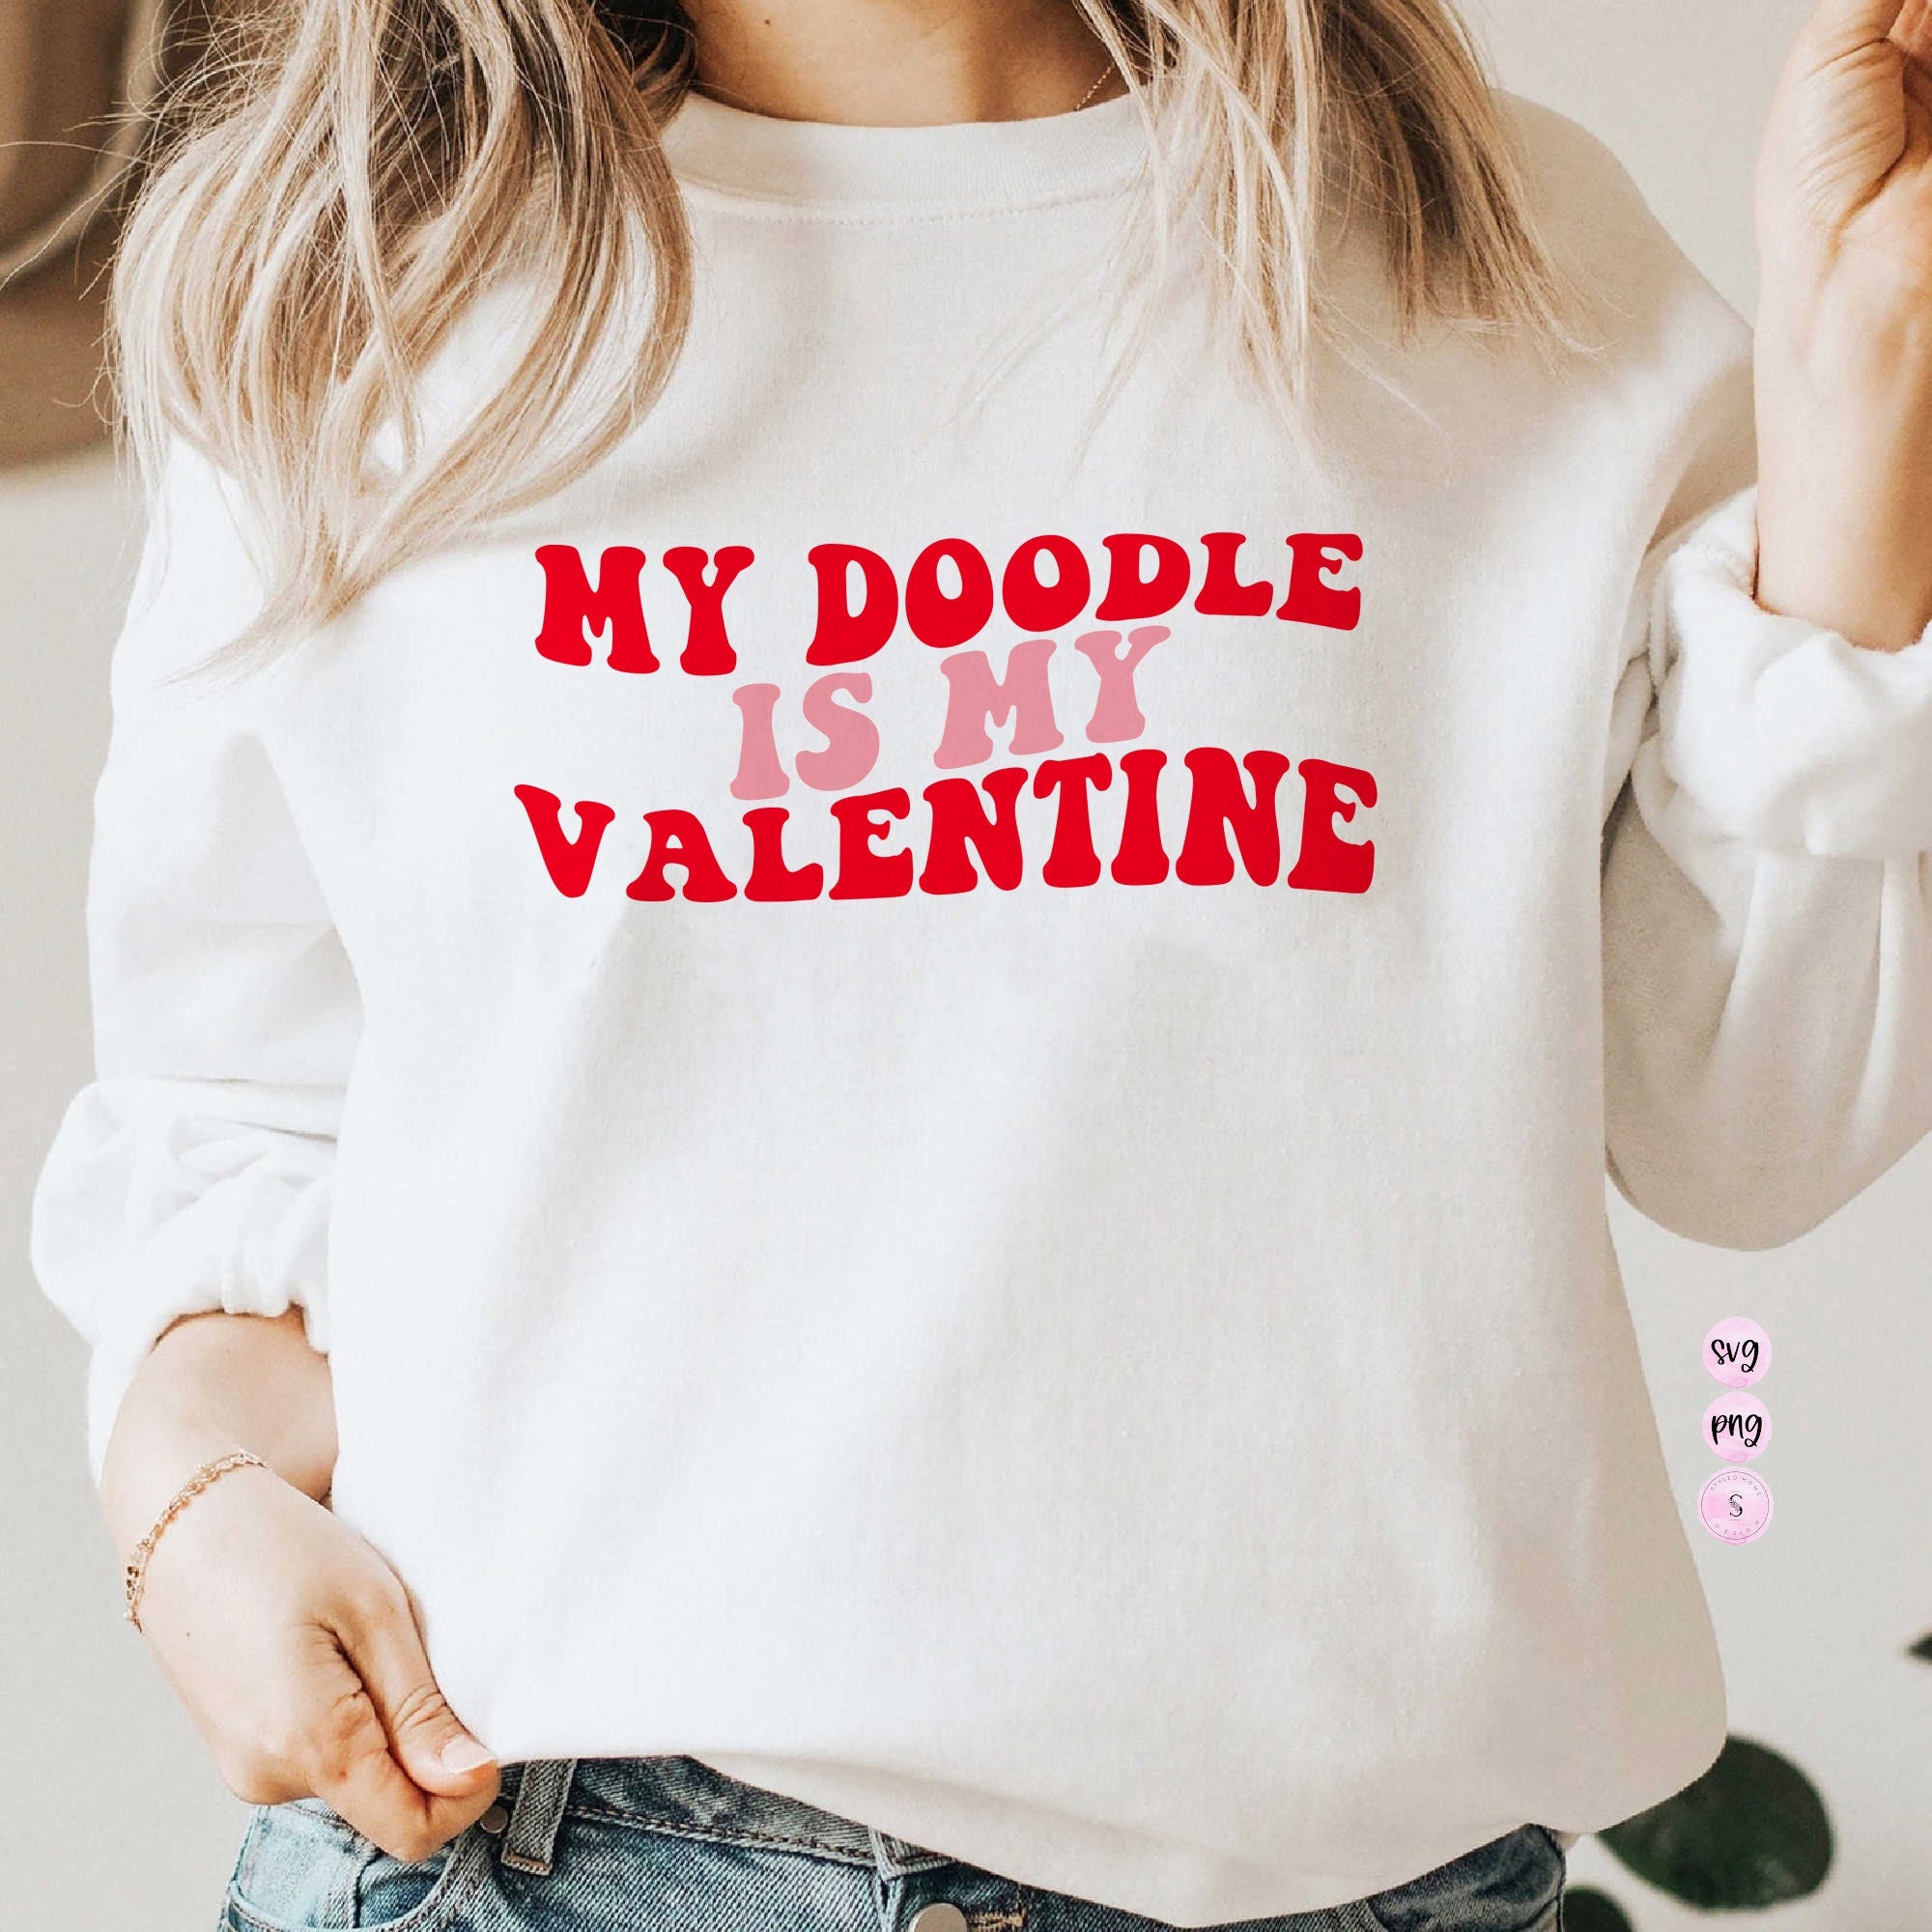 My Doodle is My Valentine, Valentine's Day SVG Cut File, Doodle Mama, Doodle Mom, Printable PNG Silhouette Cricut Sublimation